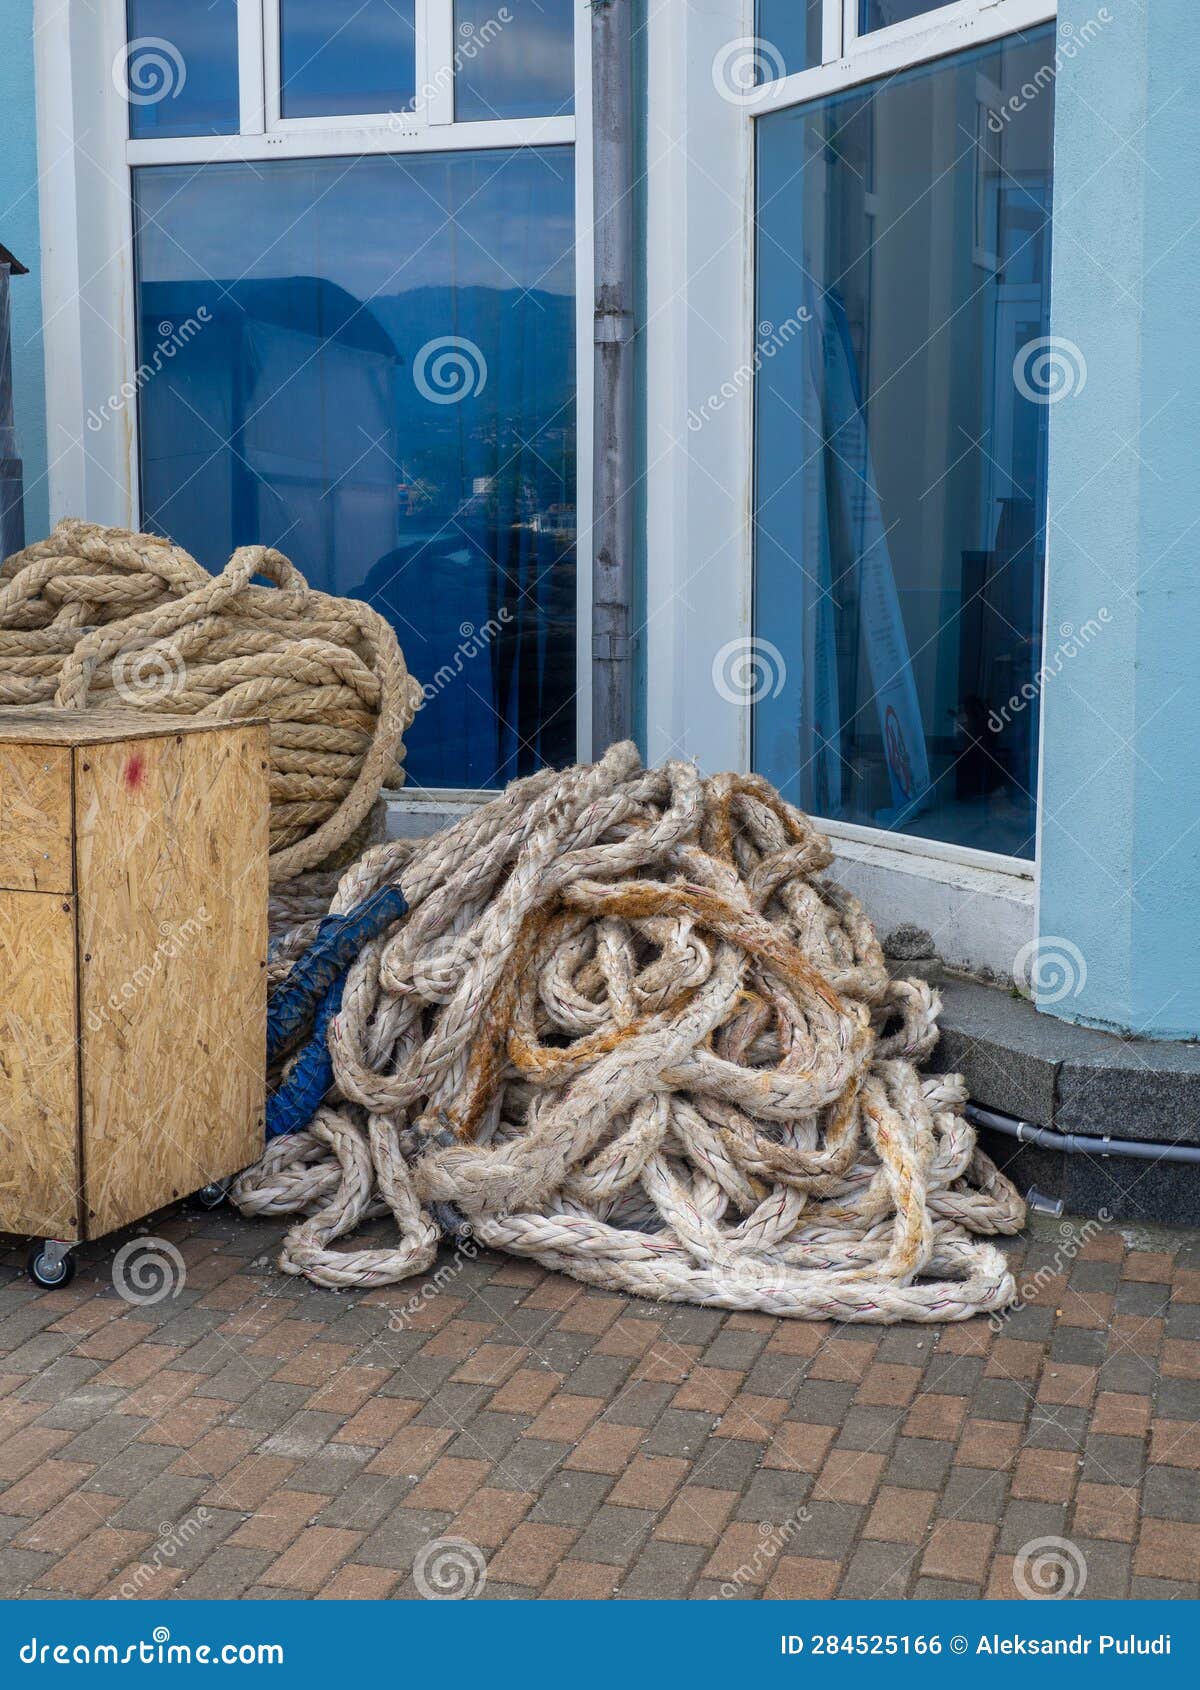 Pile of Old Mooring Line. Bay of Thick Rope Stock Photo - Image of mass,  sale: 284525166